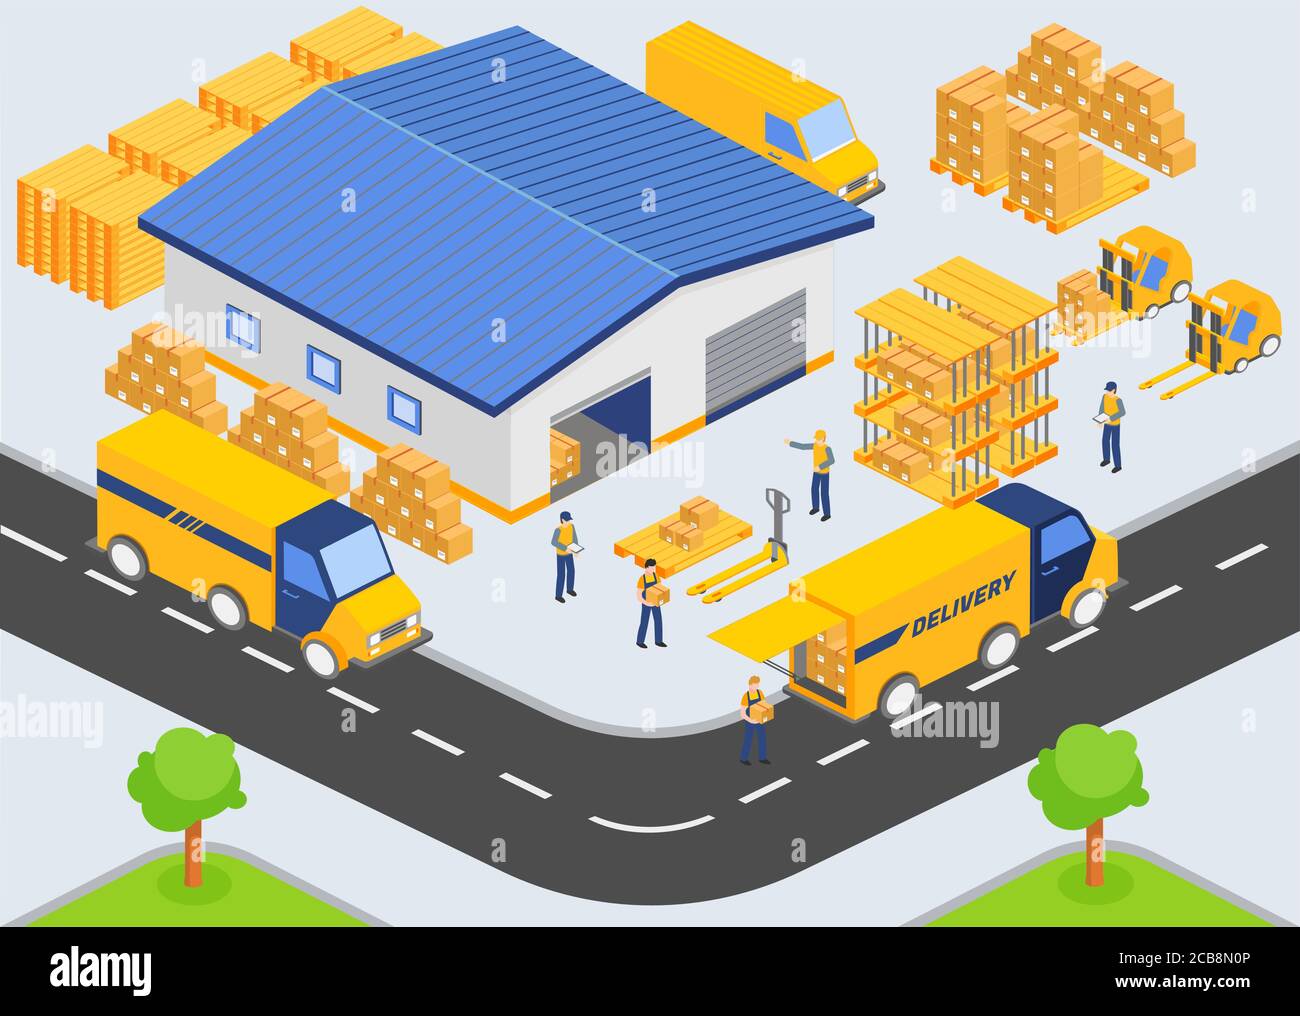 Isometric warehouse company. Loading and unloading process from warehouse. Storage building, trucks, people workers, transportation industry, delivery and logistic vector illustration Stock Vector